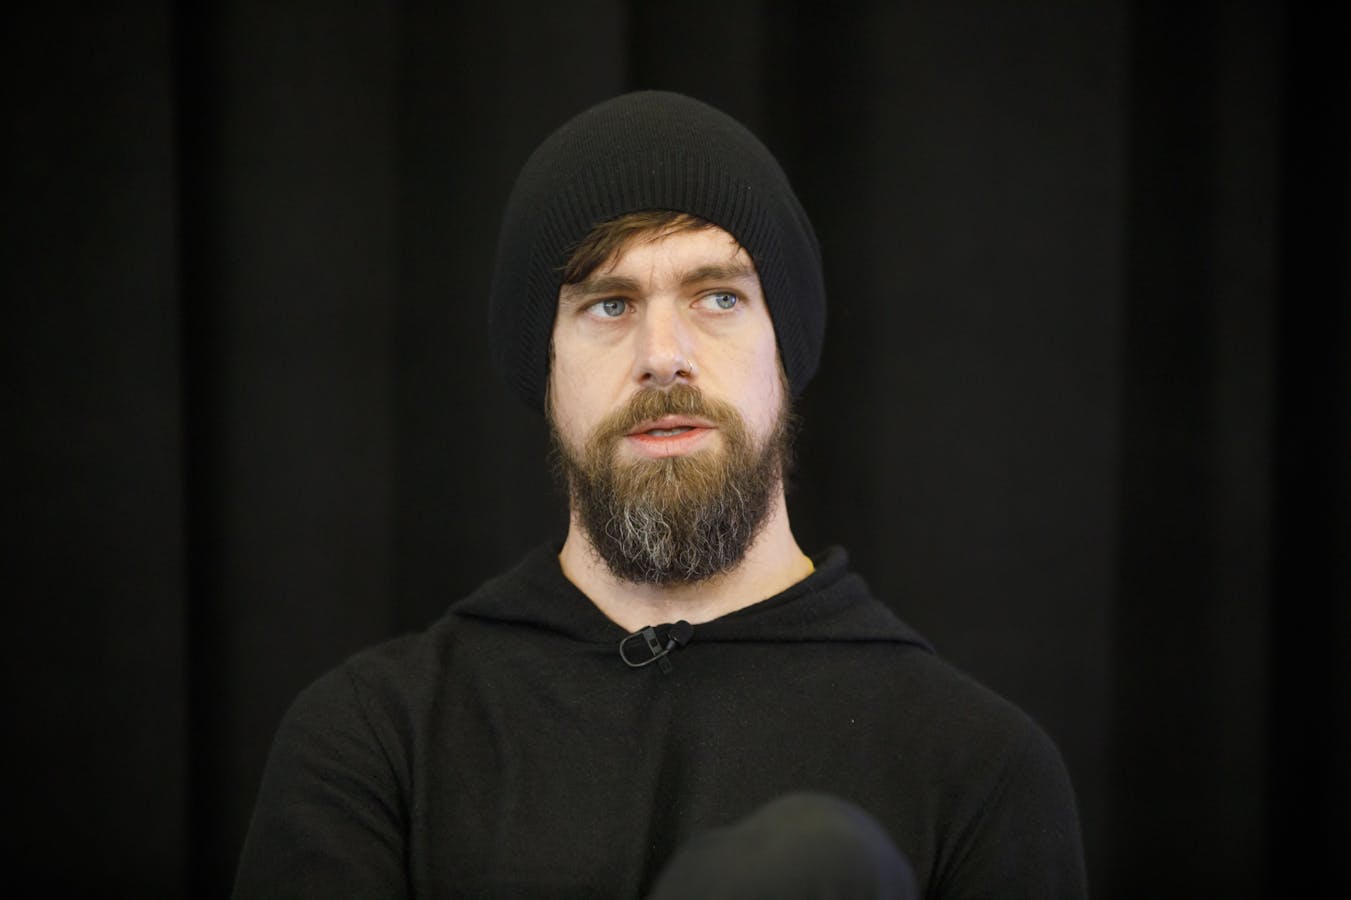 Square's Jack Dorsey. Photo by Bloomberg